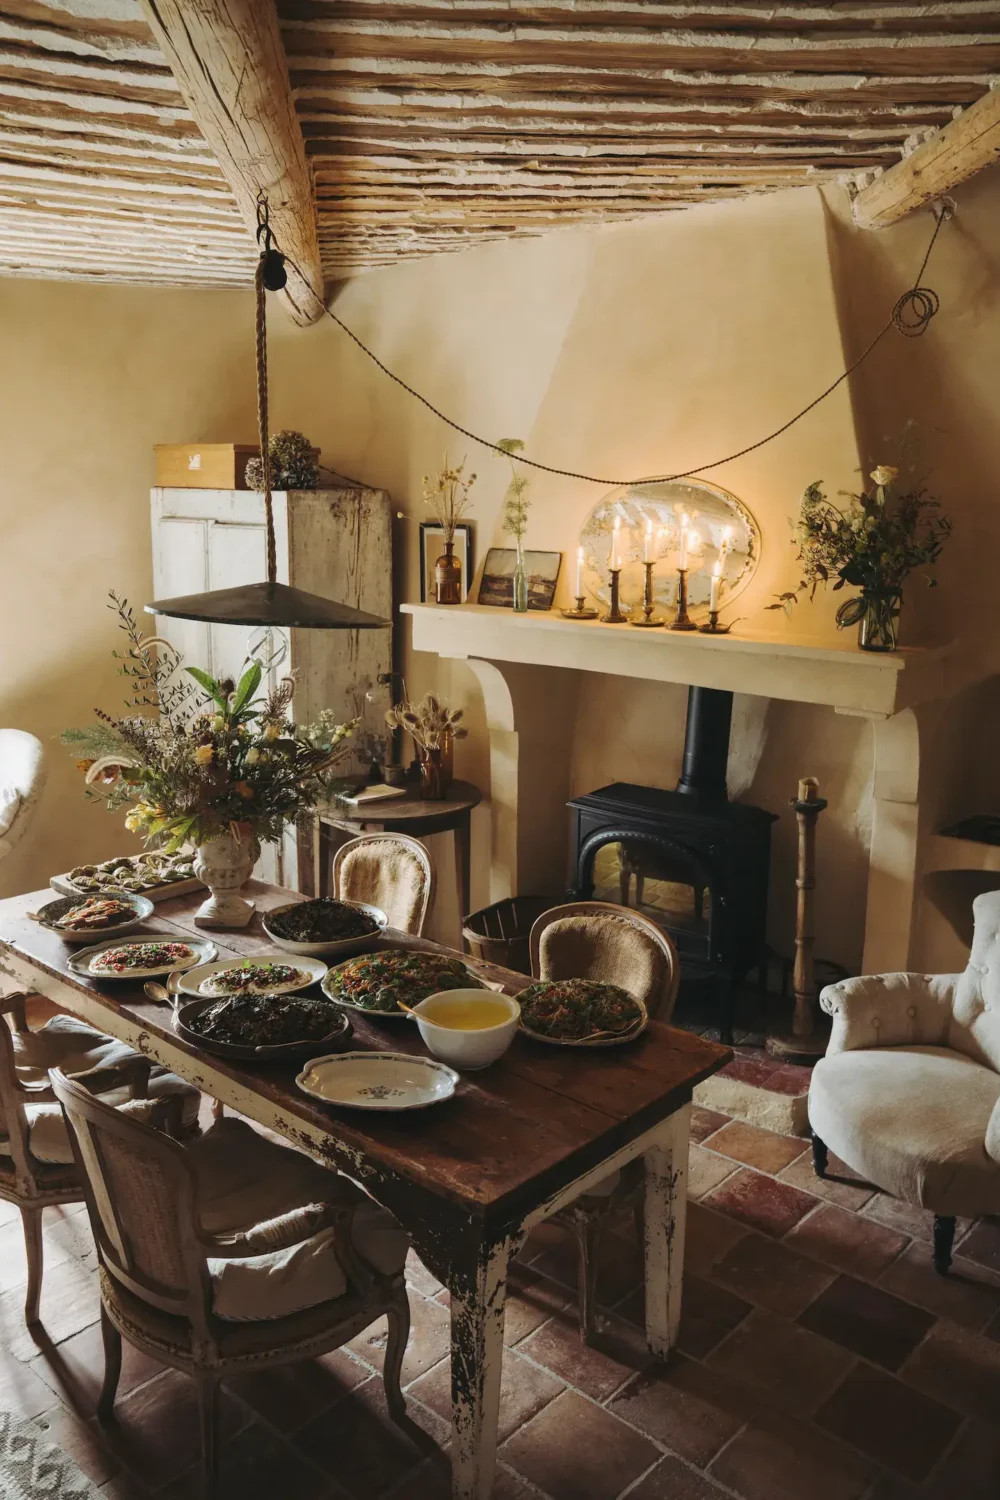 rustic-french-country-kitchen-terracotta-floor-dining-table-nordroom